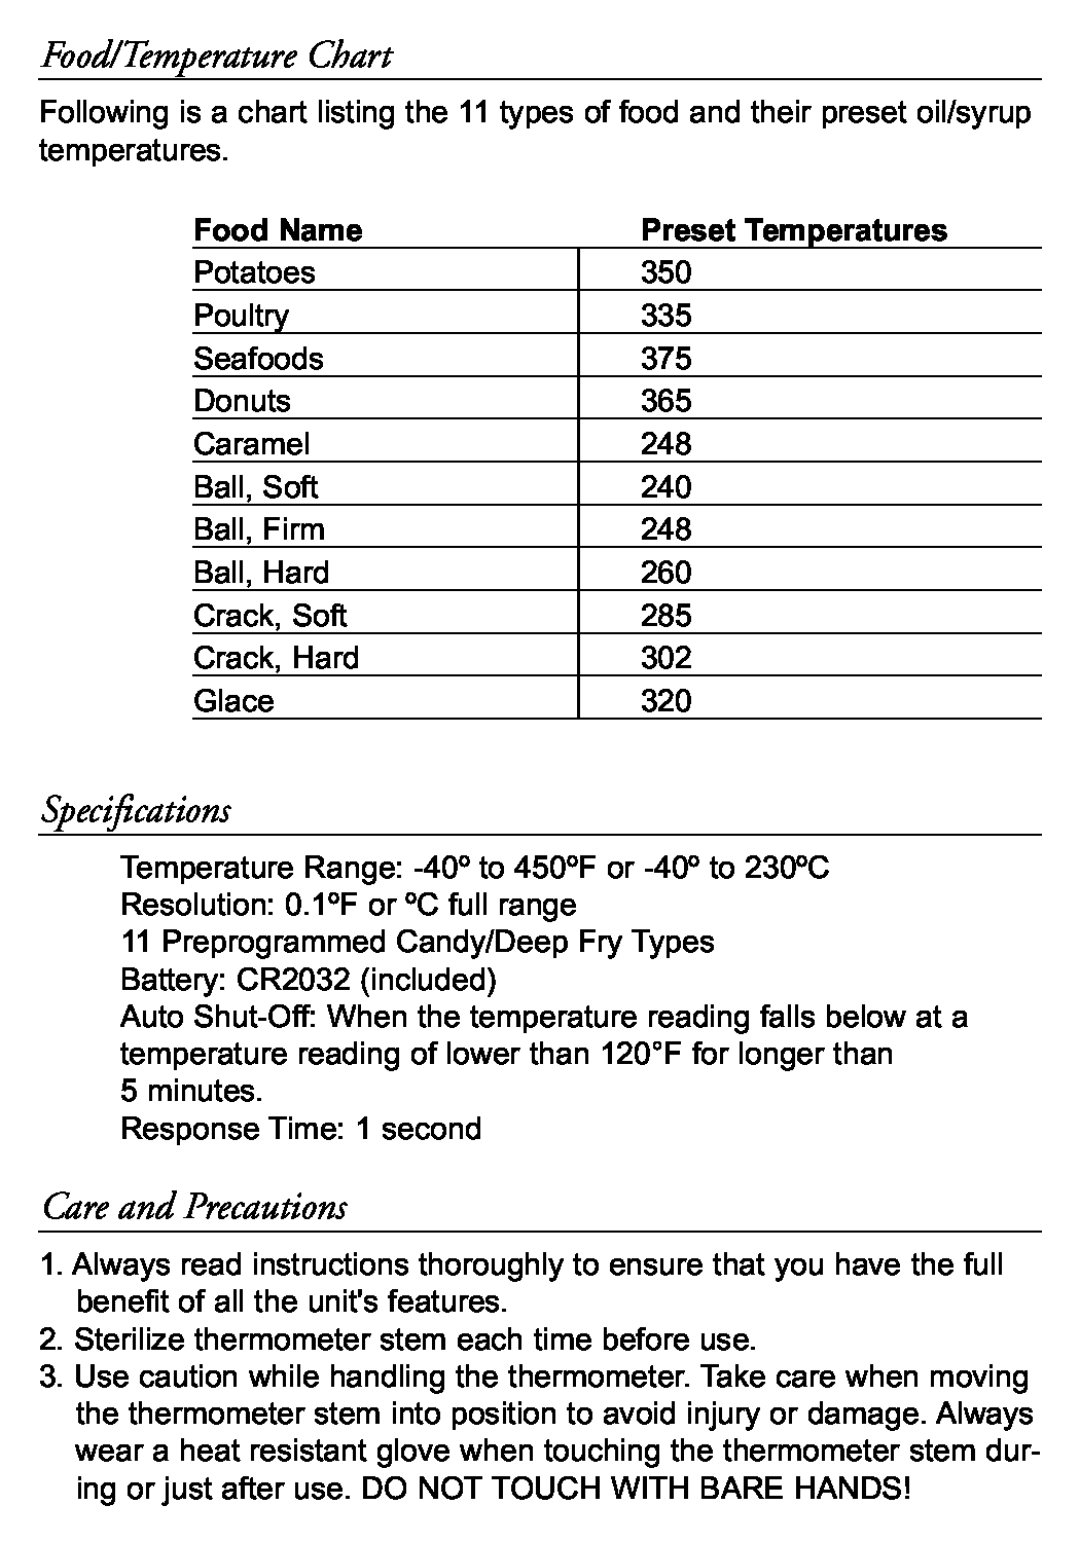 Taylor 519 instruction manual Food/Temperature Chart, Specifications, Care and Precautions, Food Name, Preset Temperatures 